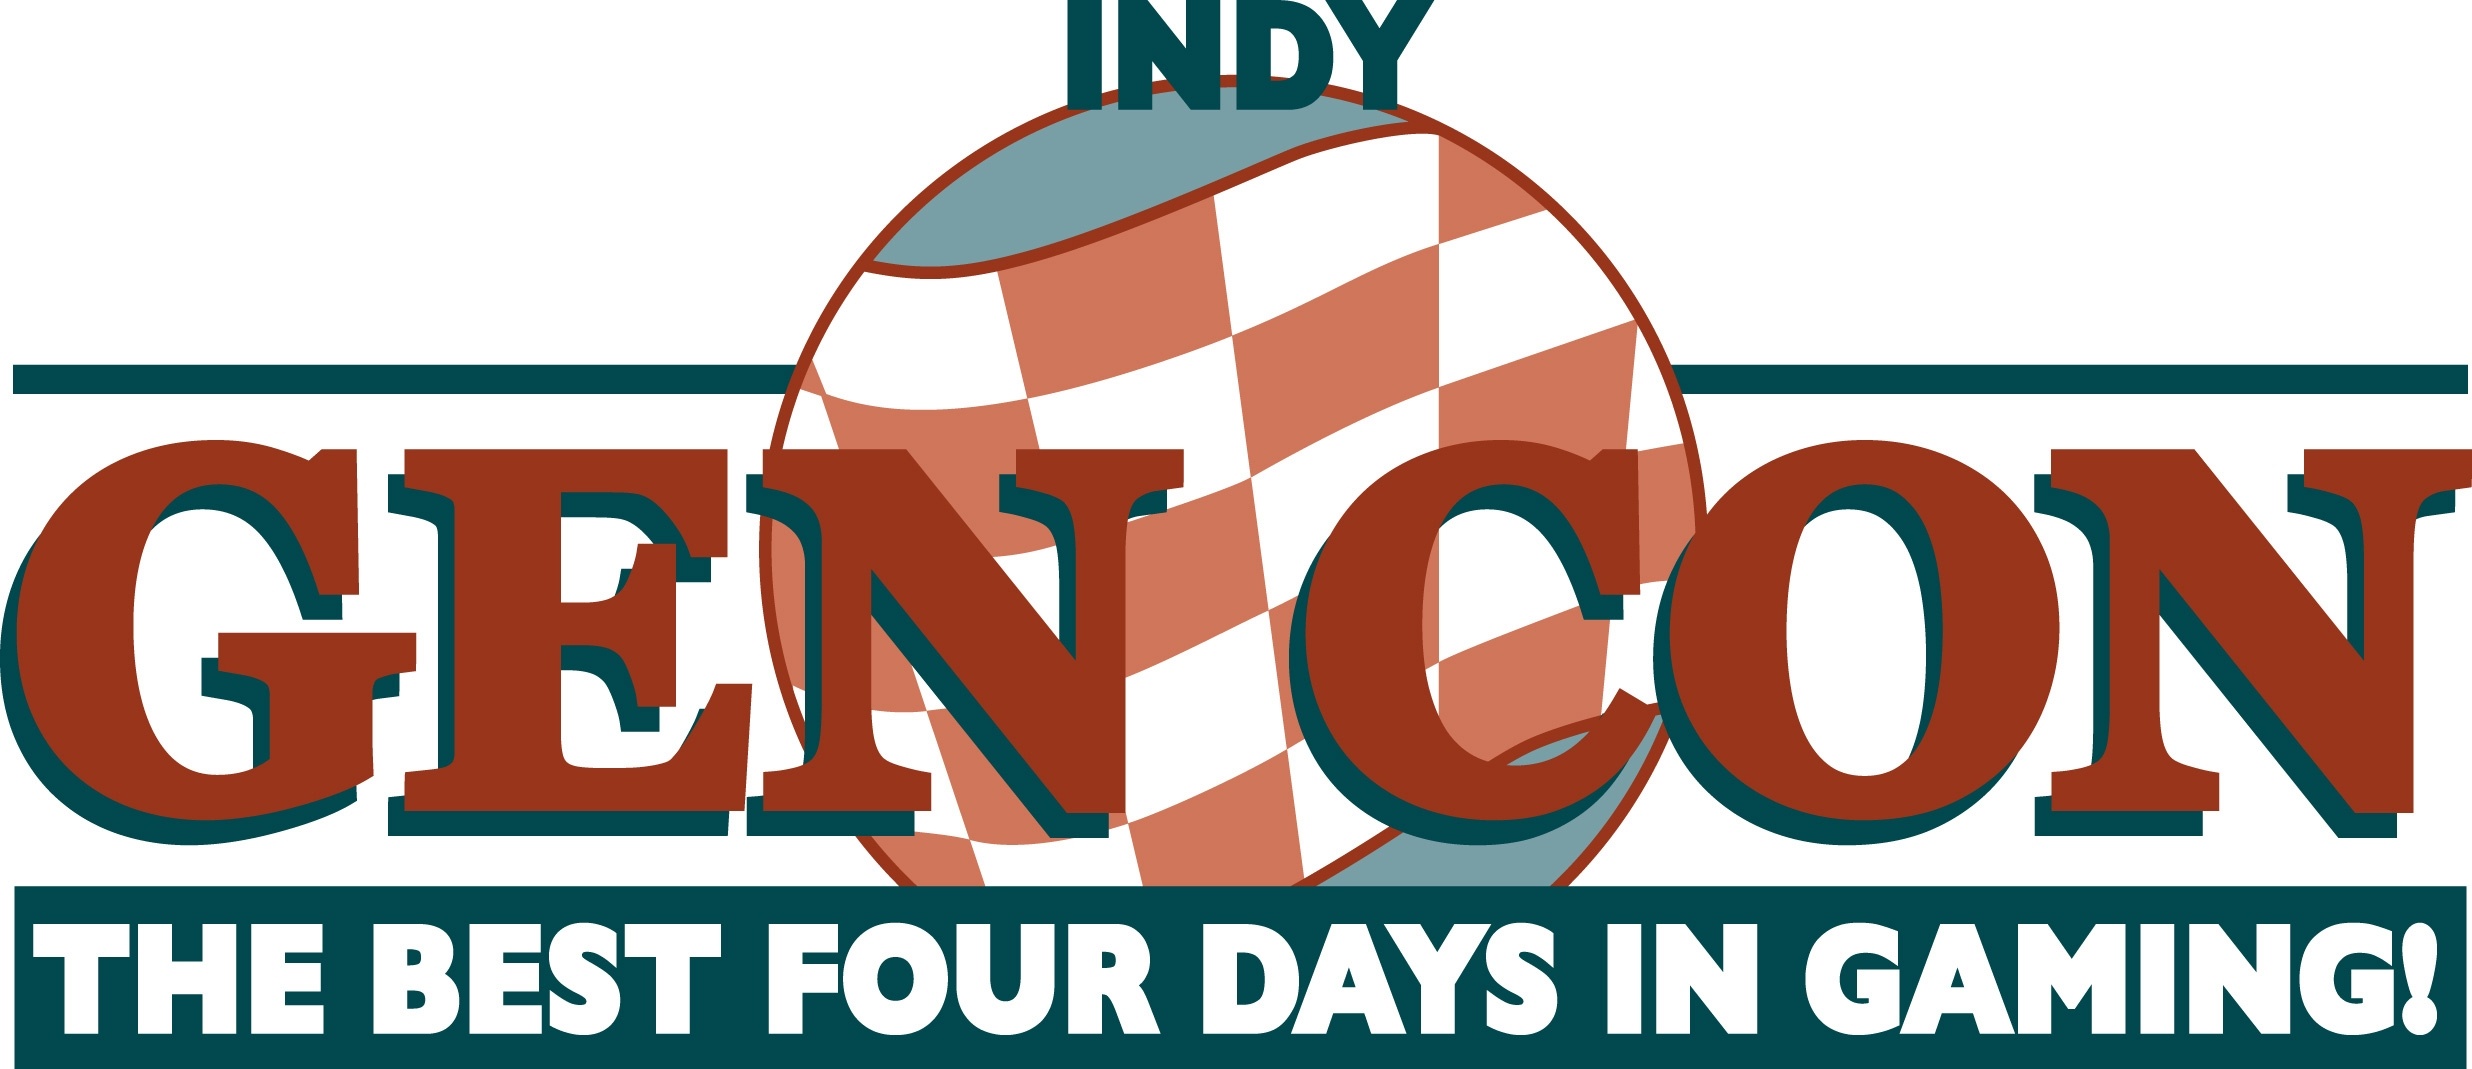 Gen Con Extends with Indy through 2023 DDO Players